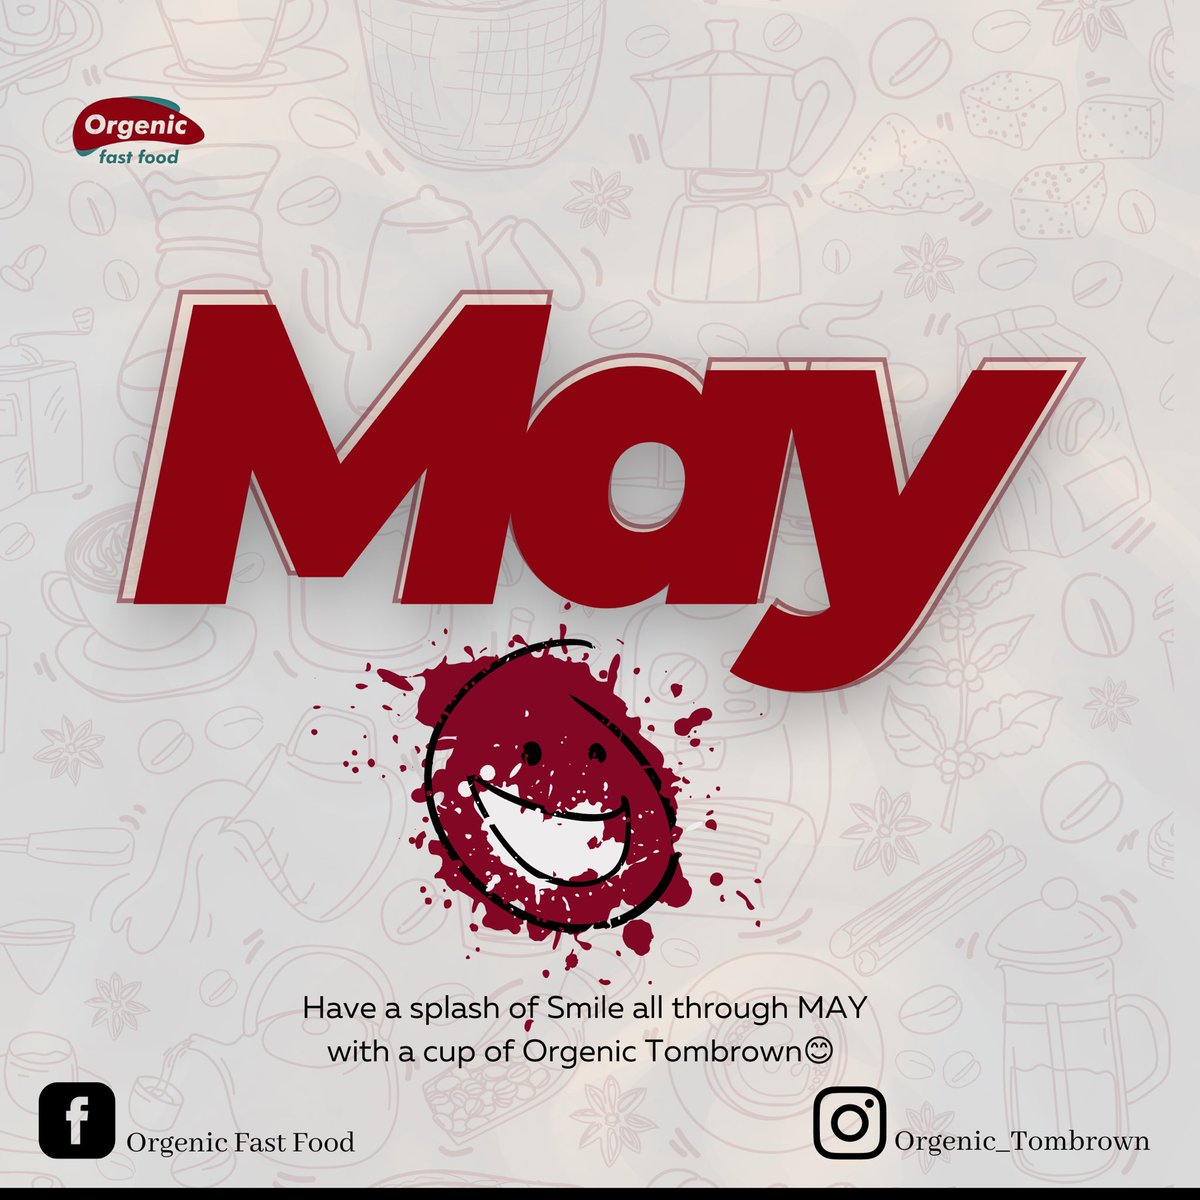 Happy New month from all of us, at Orgenic Natural food

We love and cherish every customers buying from us

And we pray your joy knows no bound this new month of May

#happynewmonth #maybaby  #maymonth #entrepreneurmind #newmonth #mayborn #may #may2023 #politics #presidentelect